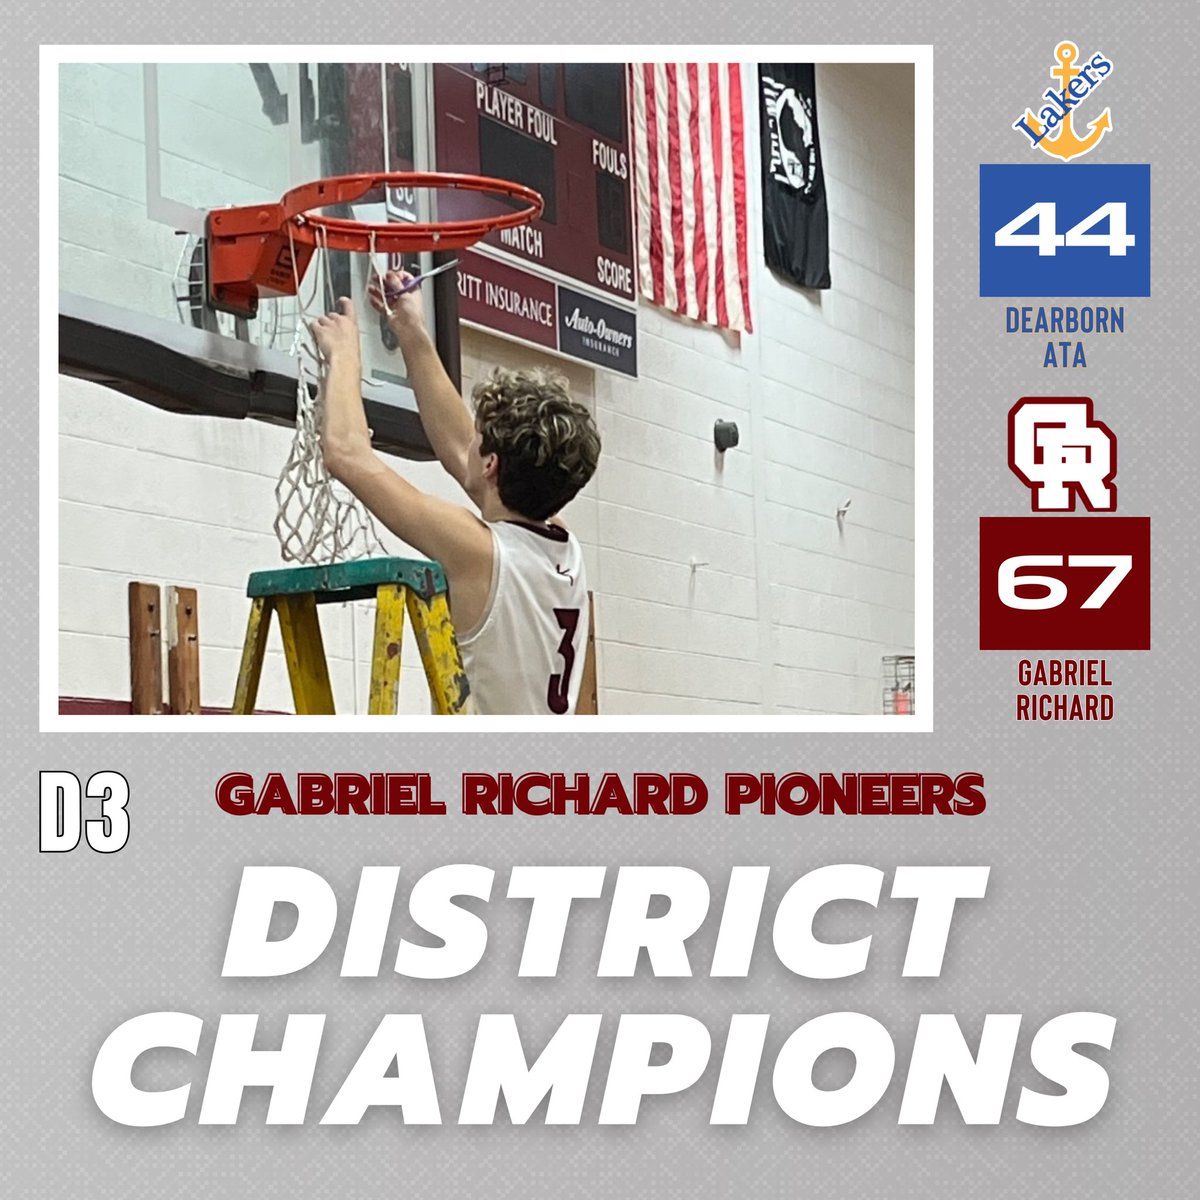 Gabriel Richard wins yet another District Title in District 88 🏀